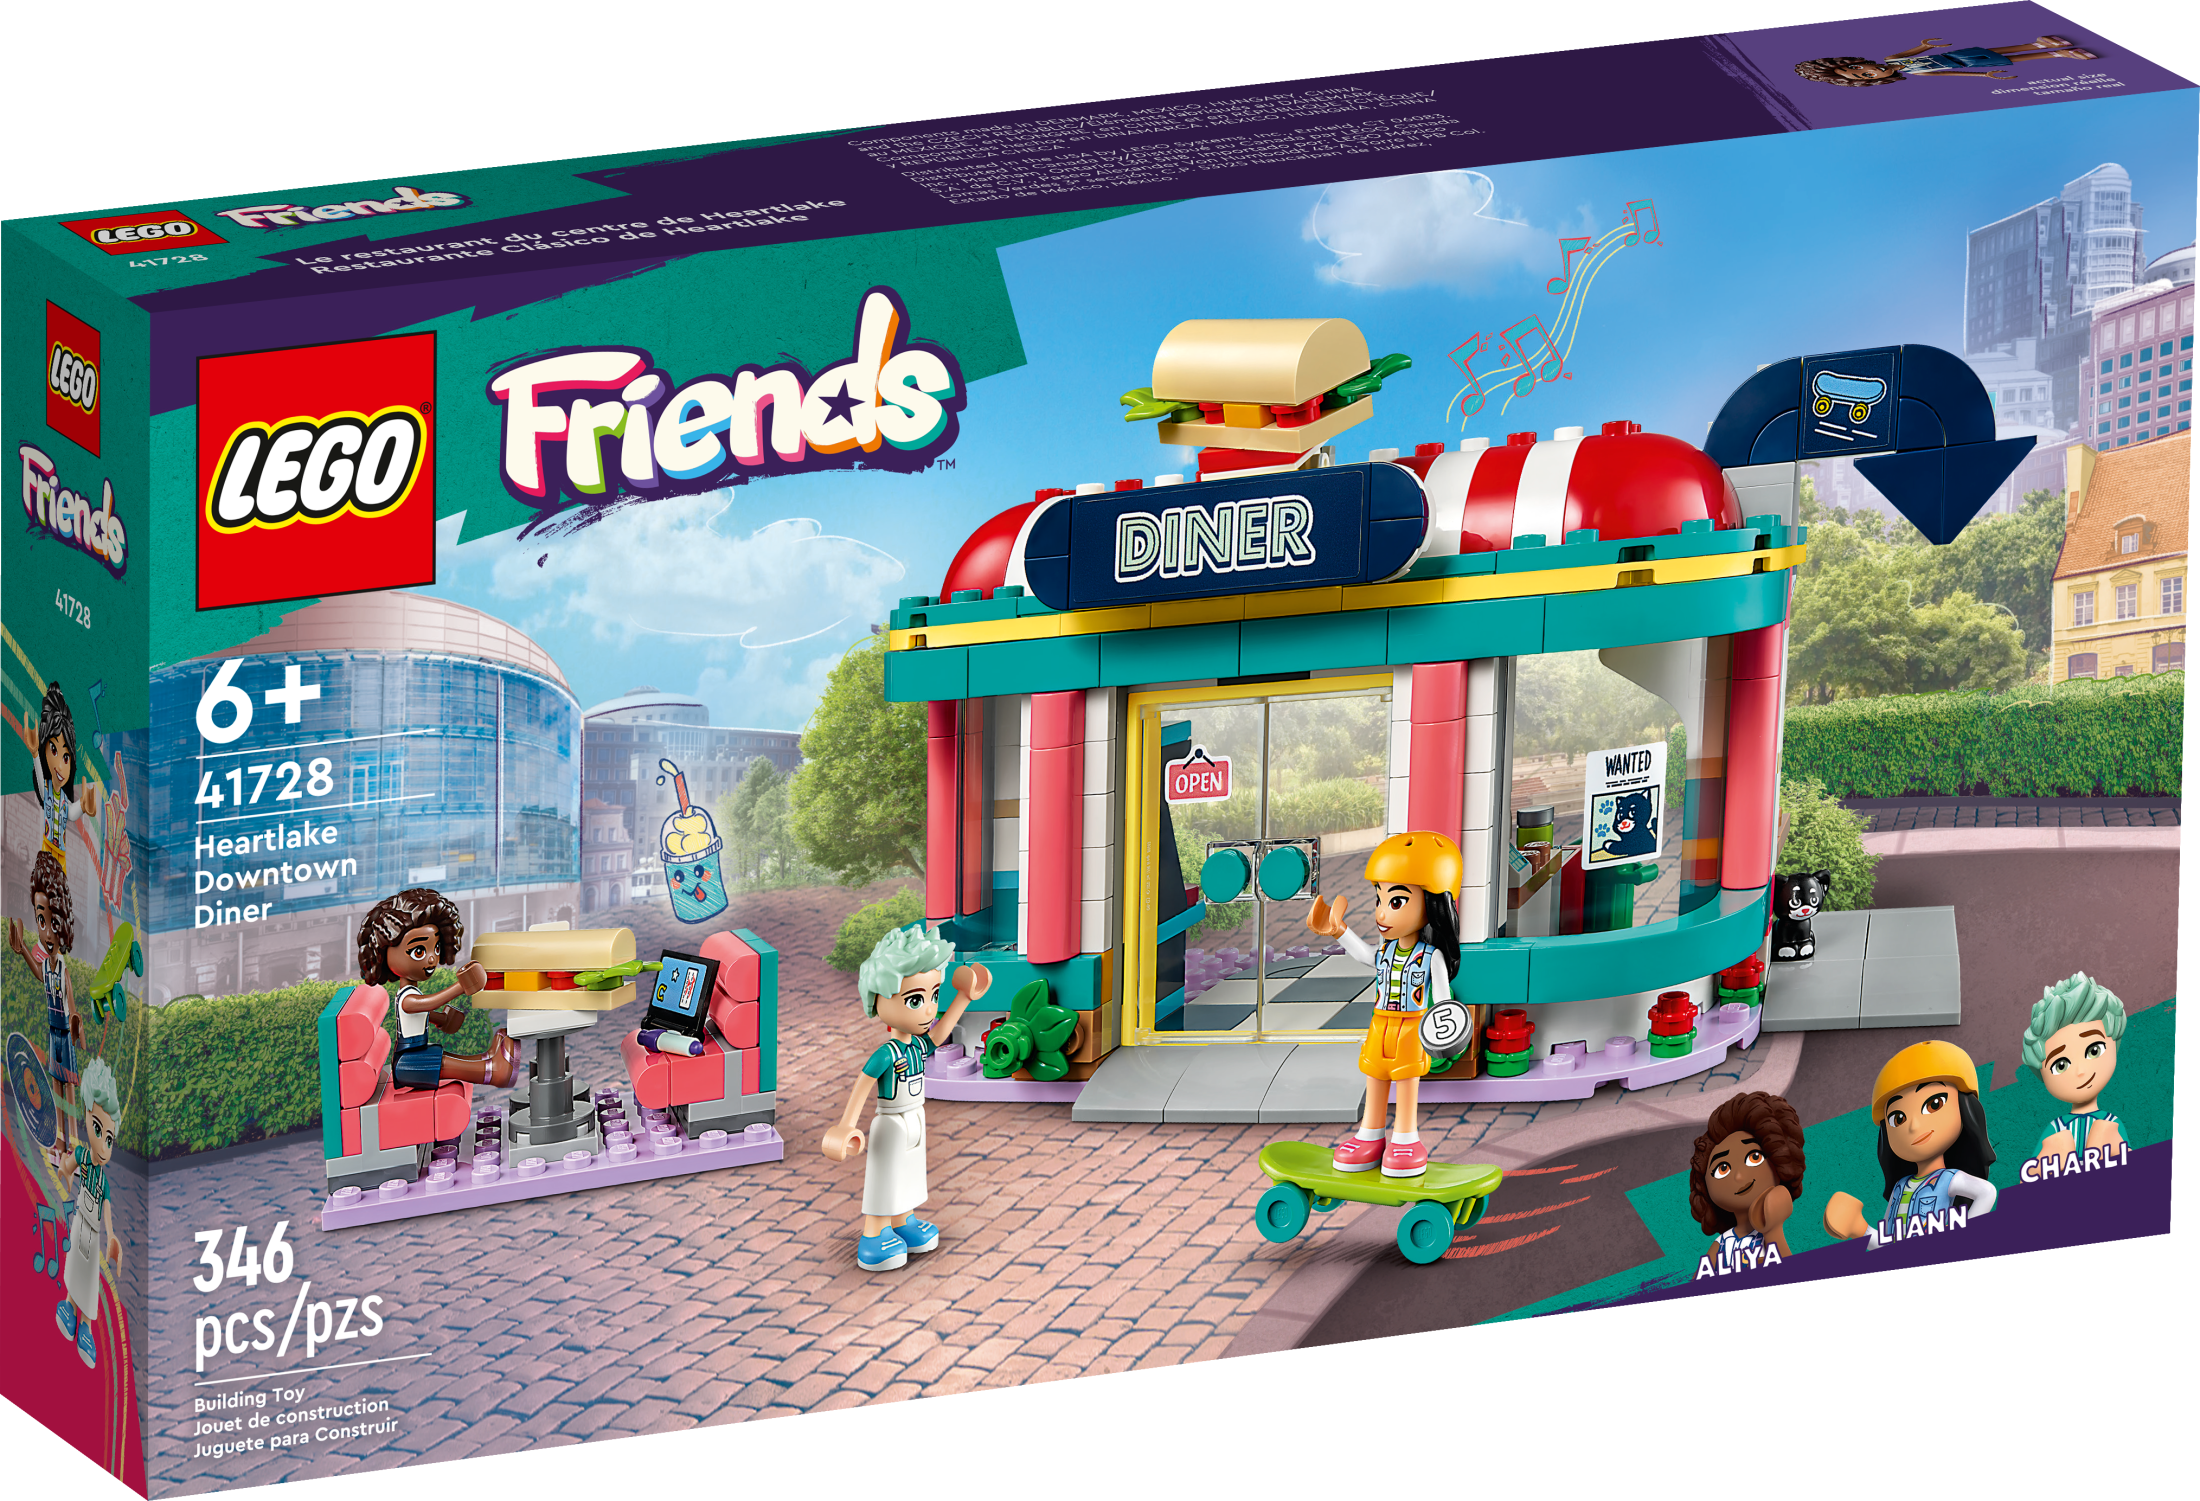 LEGO Friends Heartlake Downtown Diner 41728 Building Toy - Restaurant Pretend Playset with Food, Includes Mini-Dolls Liann, Aliya, and Charli, Birthday Gift Toy Set for Boys and Girls Ages 6+ - image 3 of 8